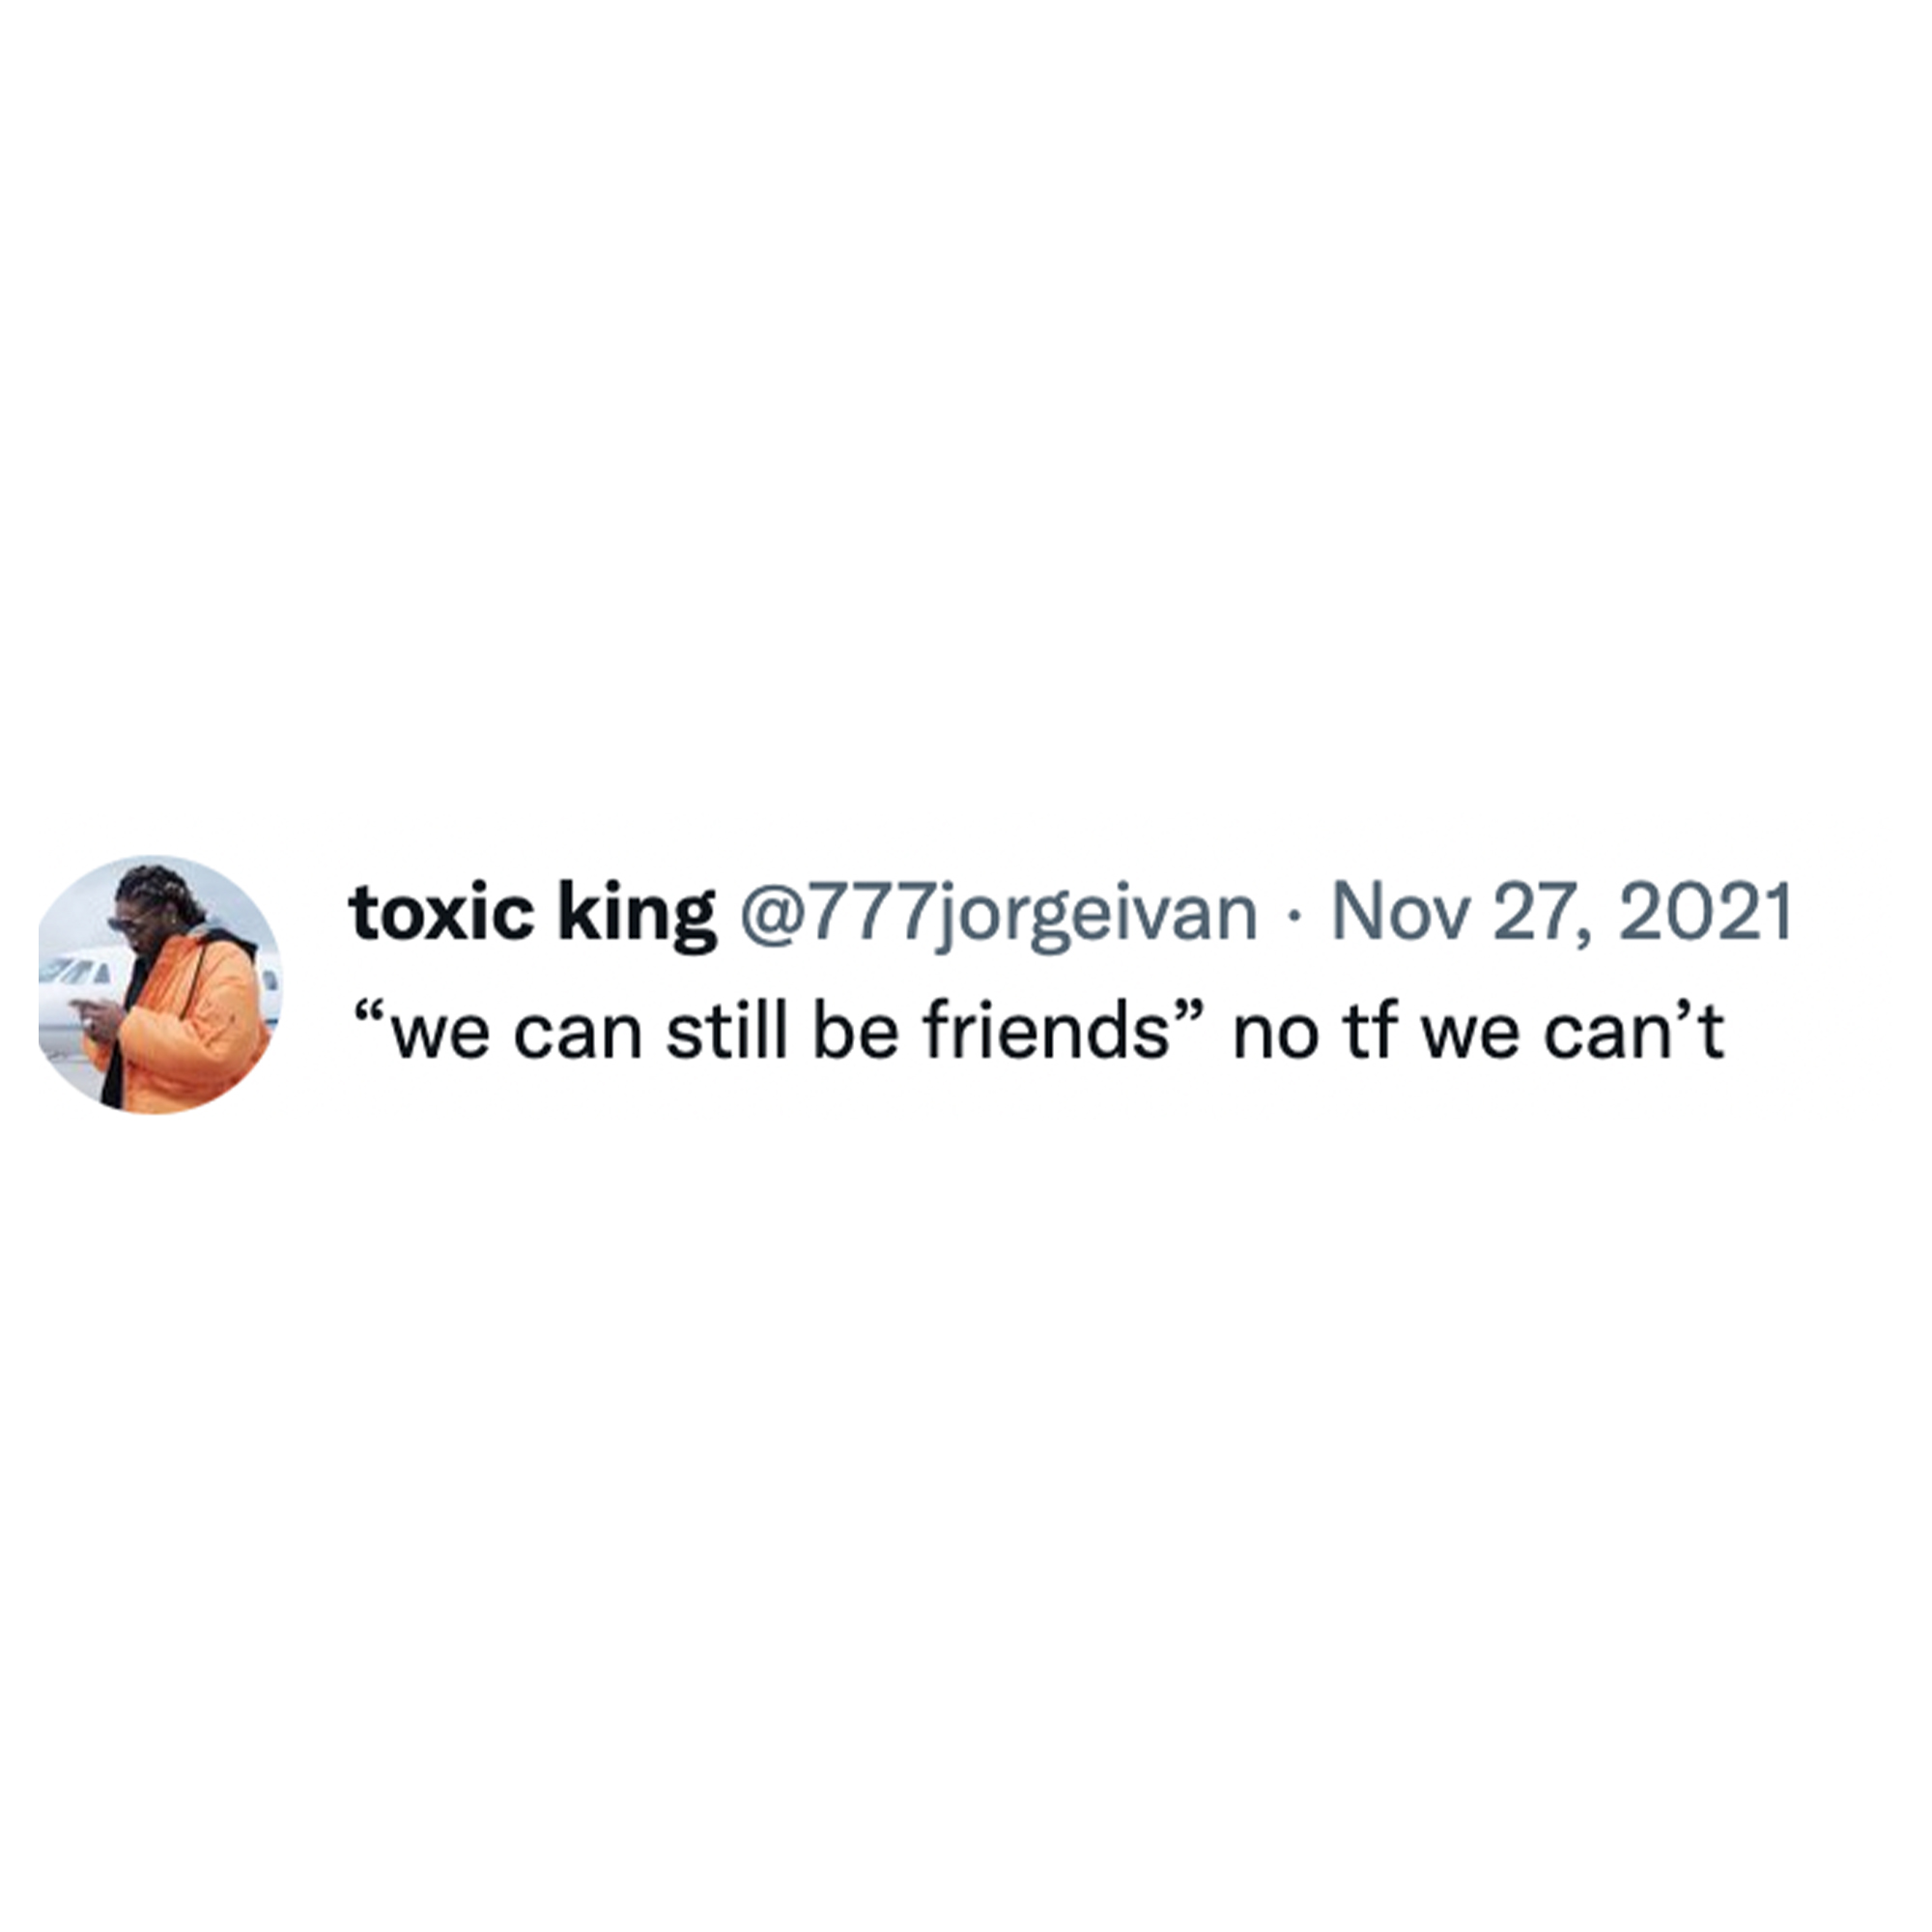 Toxic Memes and Tweets - toxic king . "we can still be friends" no tf we can't